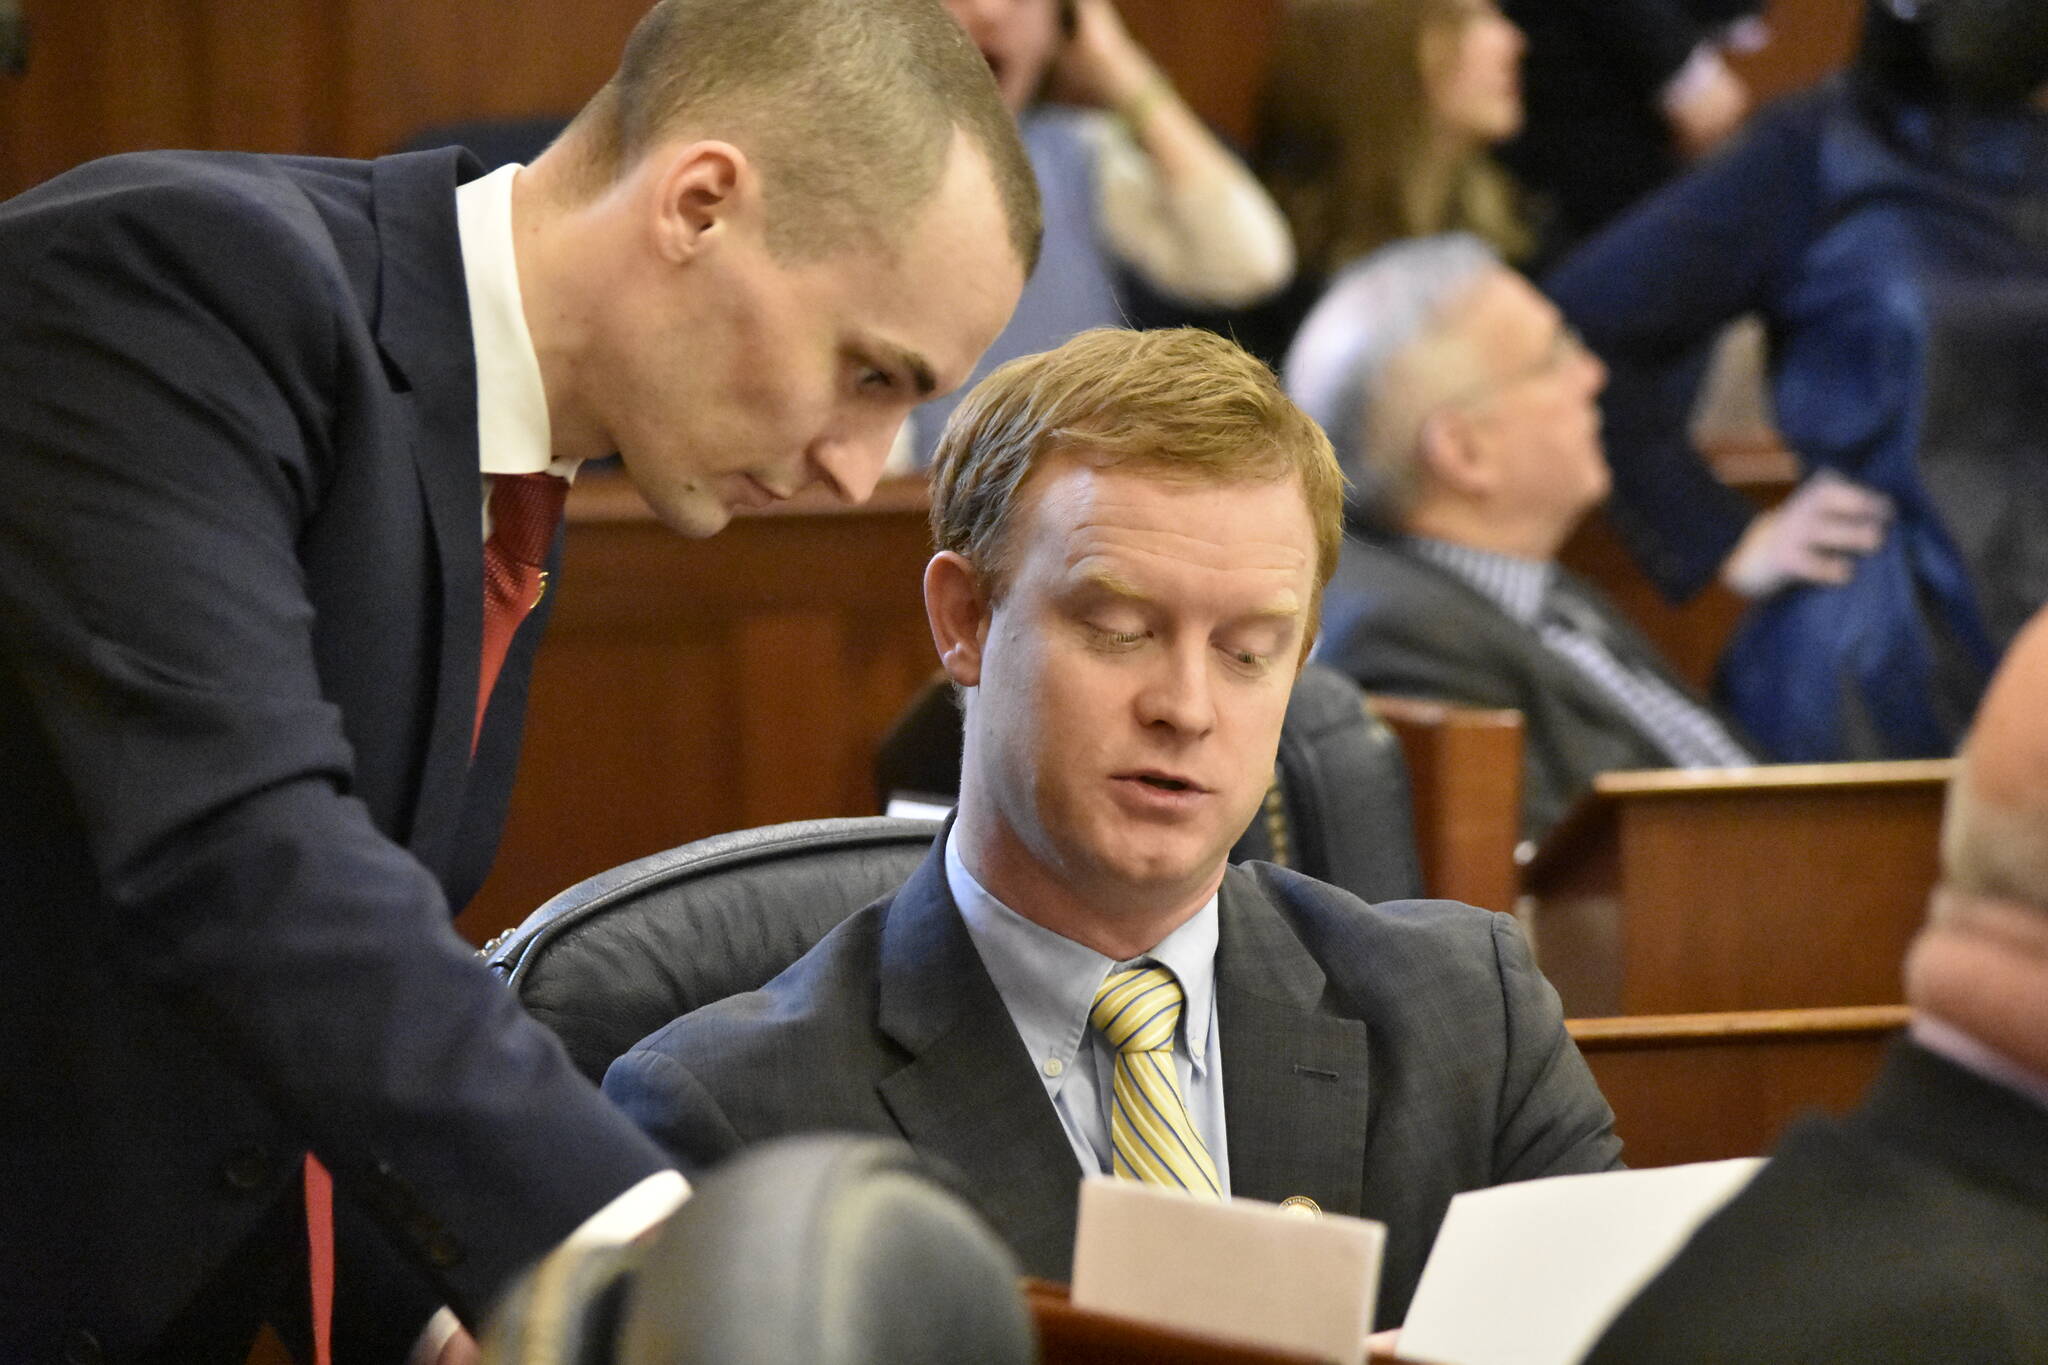 Reps. Clavin Schrage, I-Anchorage, left, and David Eastman, R-Wasilla, discuss a bill on the floor of the Alaska House of Representatives to enact limits on individual contributions to political campaigns, on Monday, March 14, 2022. (Peter Segall / Juneau Empire File)